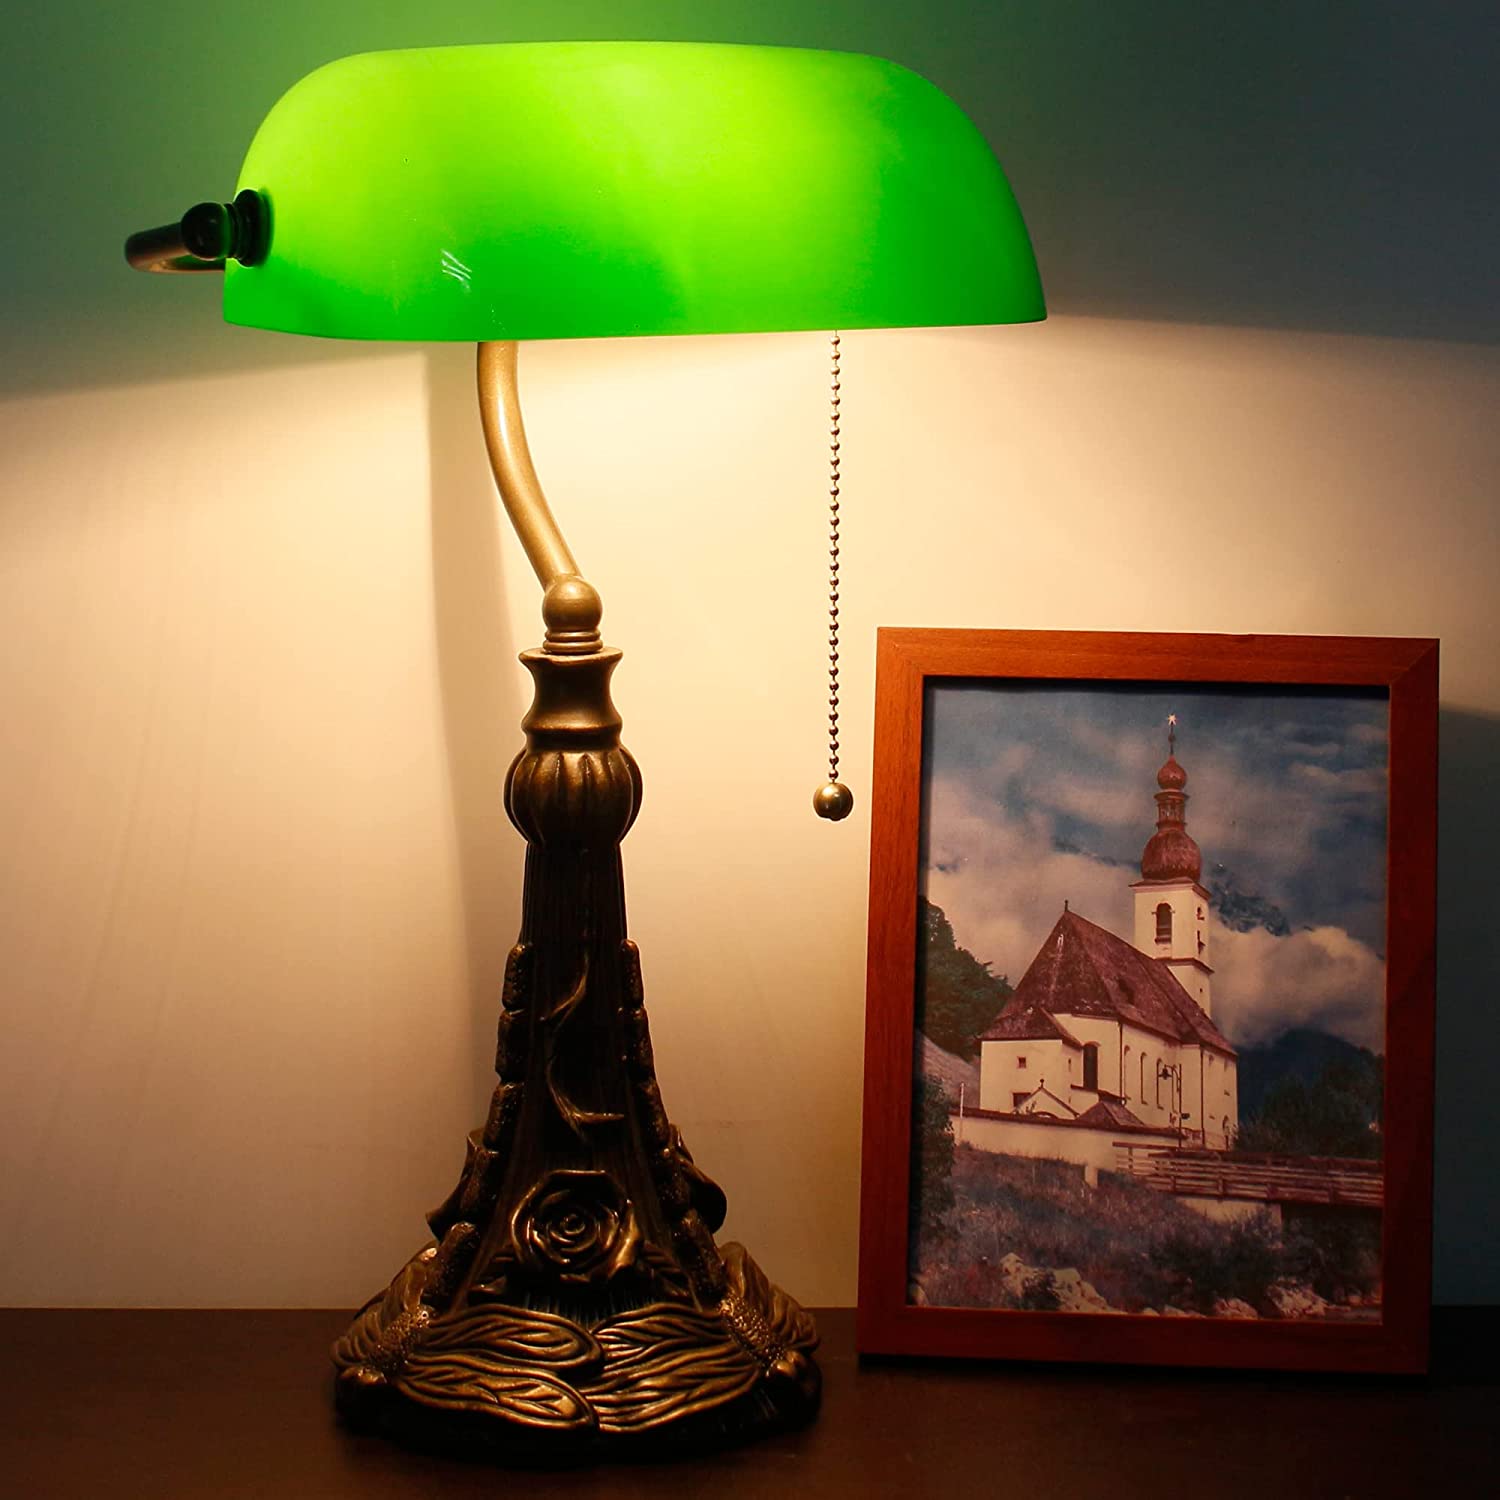 Werfactory® Banker Lamp Tiffany Desk Lamp Green Stained Glass Table Lamp